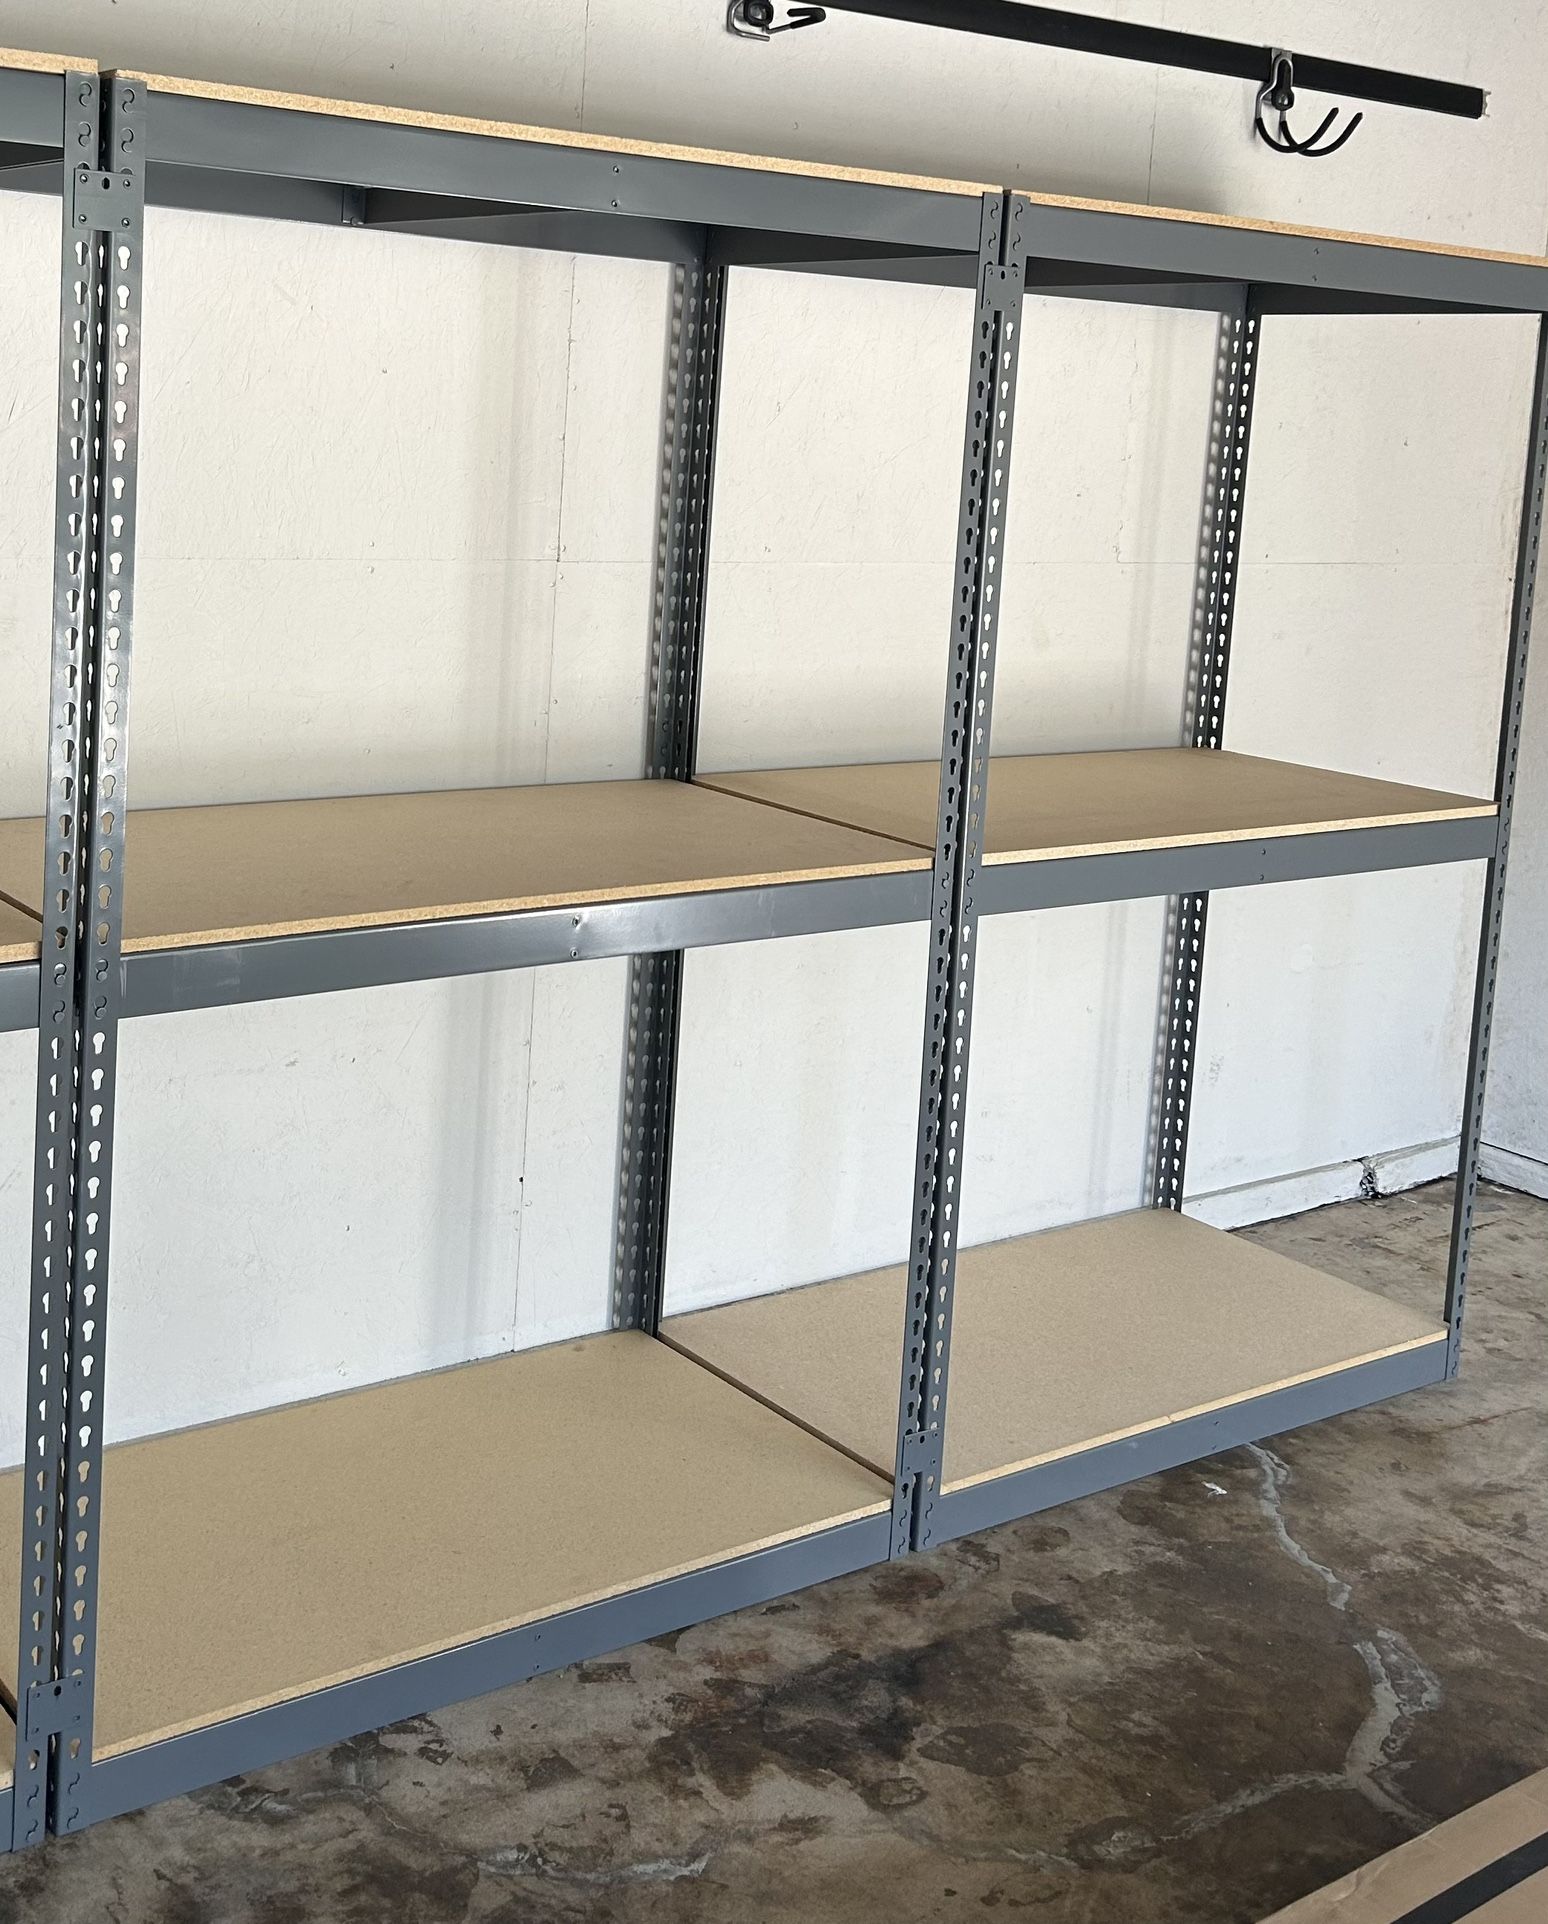 Shelving 48 in W x 24 in D New Industrial Boltless Warehouse & Garage Racks Stronger than HomeDepot Lowes Costco Delivery Available